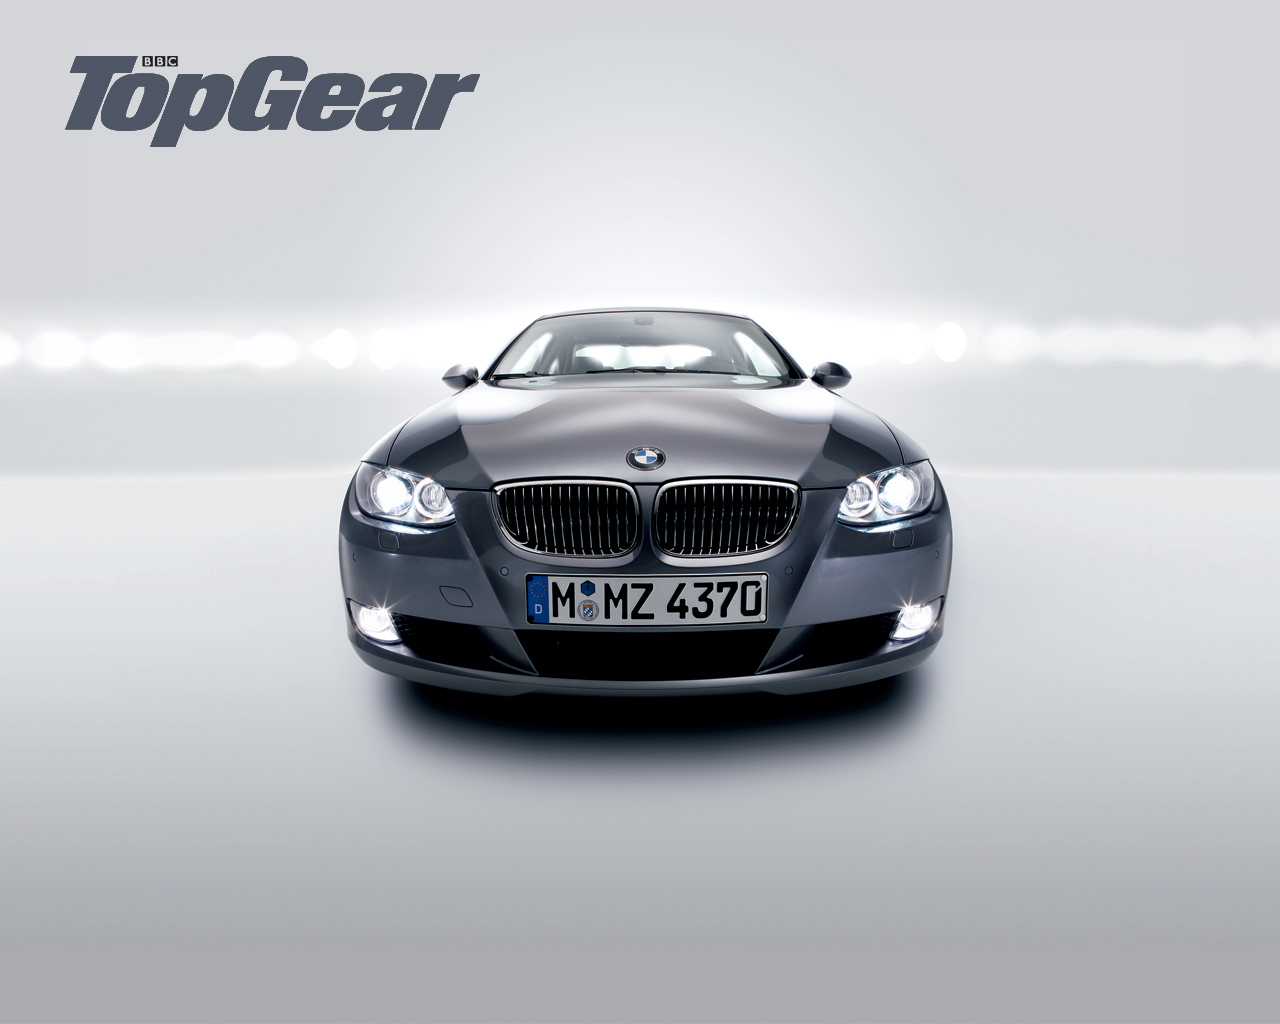 Bmw 335i and top gear #5